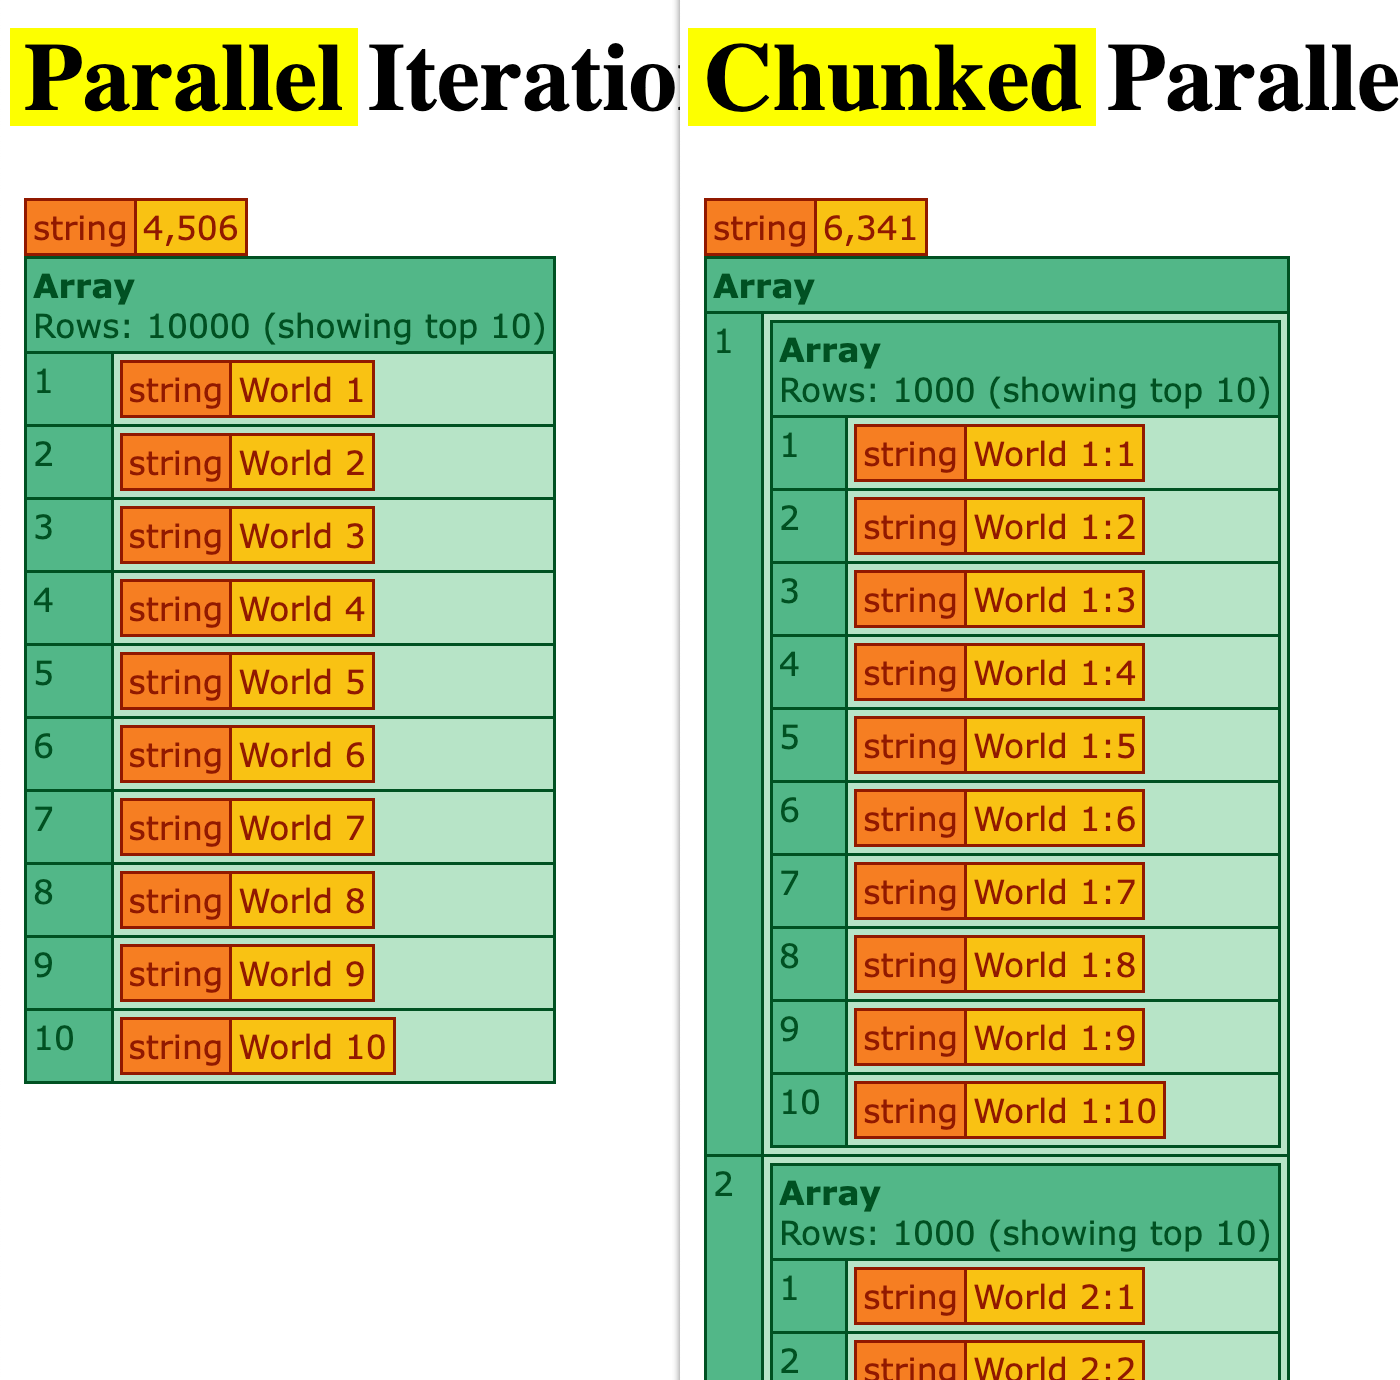 Screenshots of the two tests showing that the plain parallel iteration took about 4.5 seconds to complete and the chunked parallel iteration took about 6 seconds to complete.